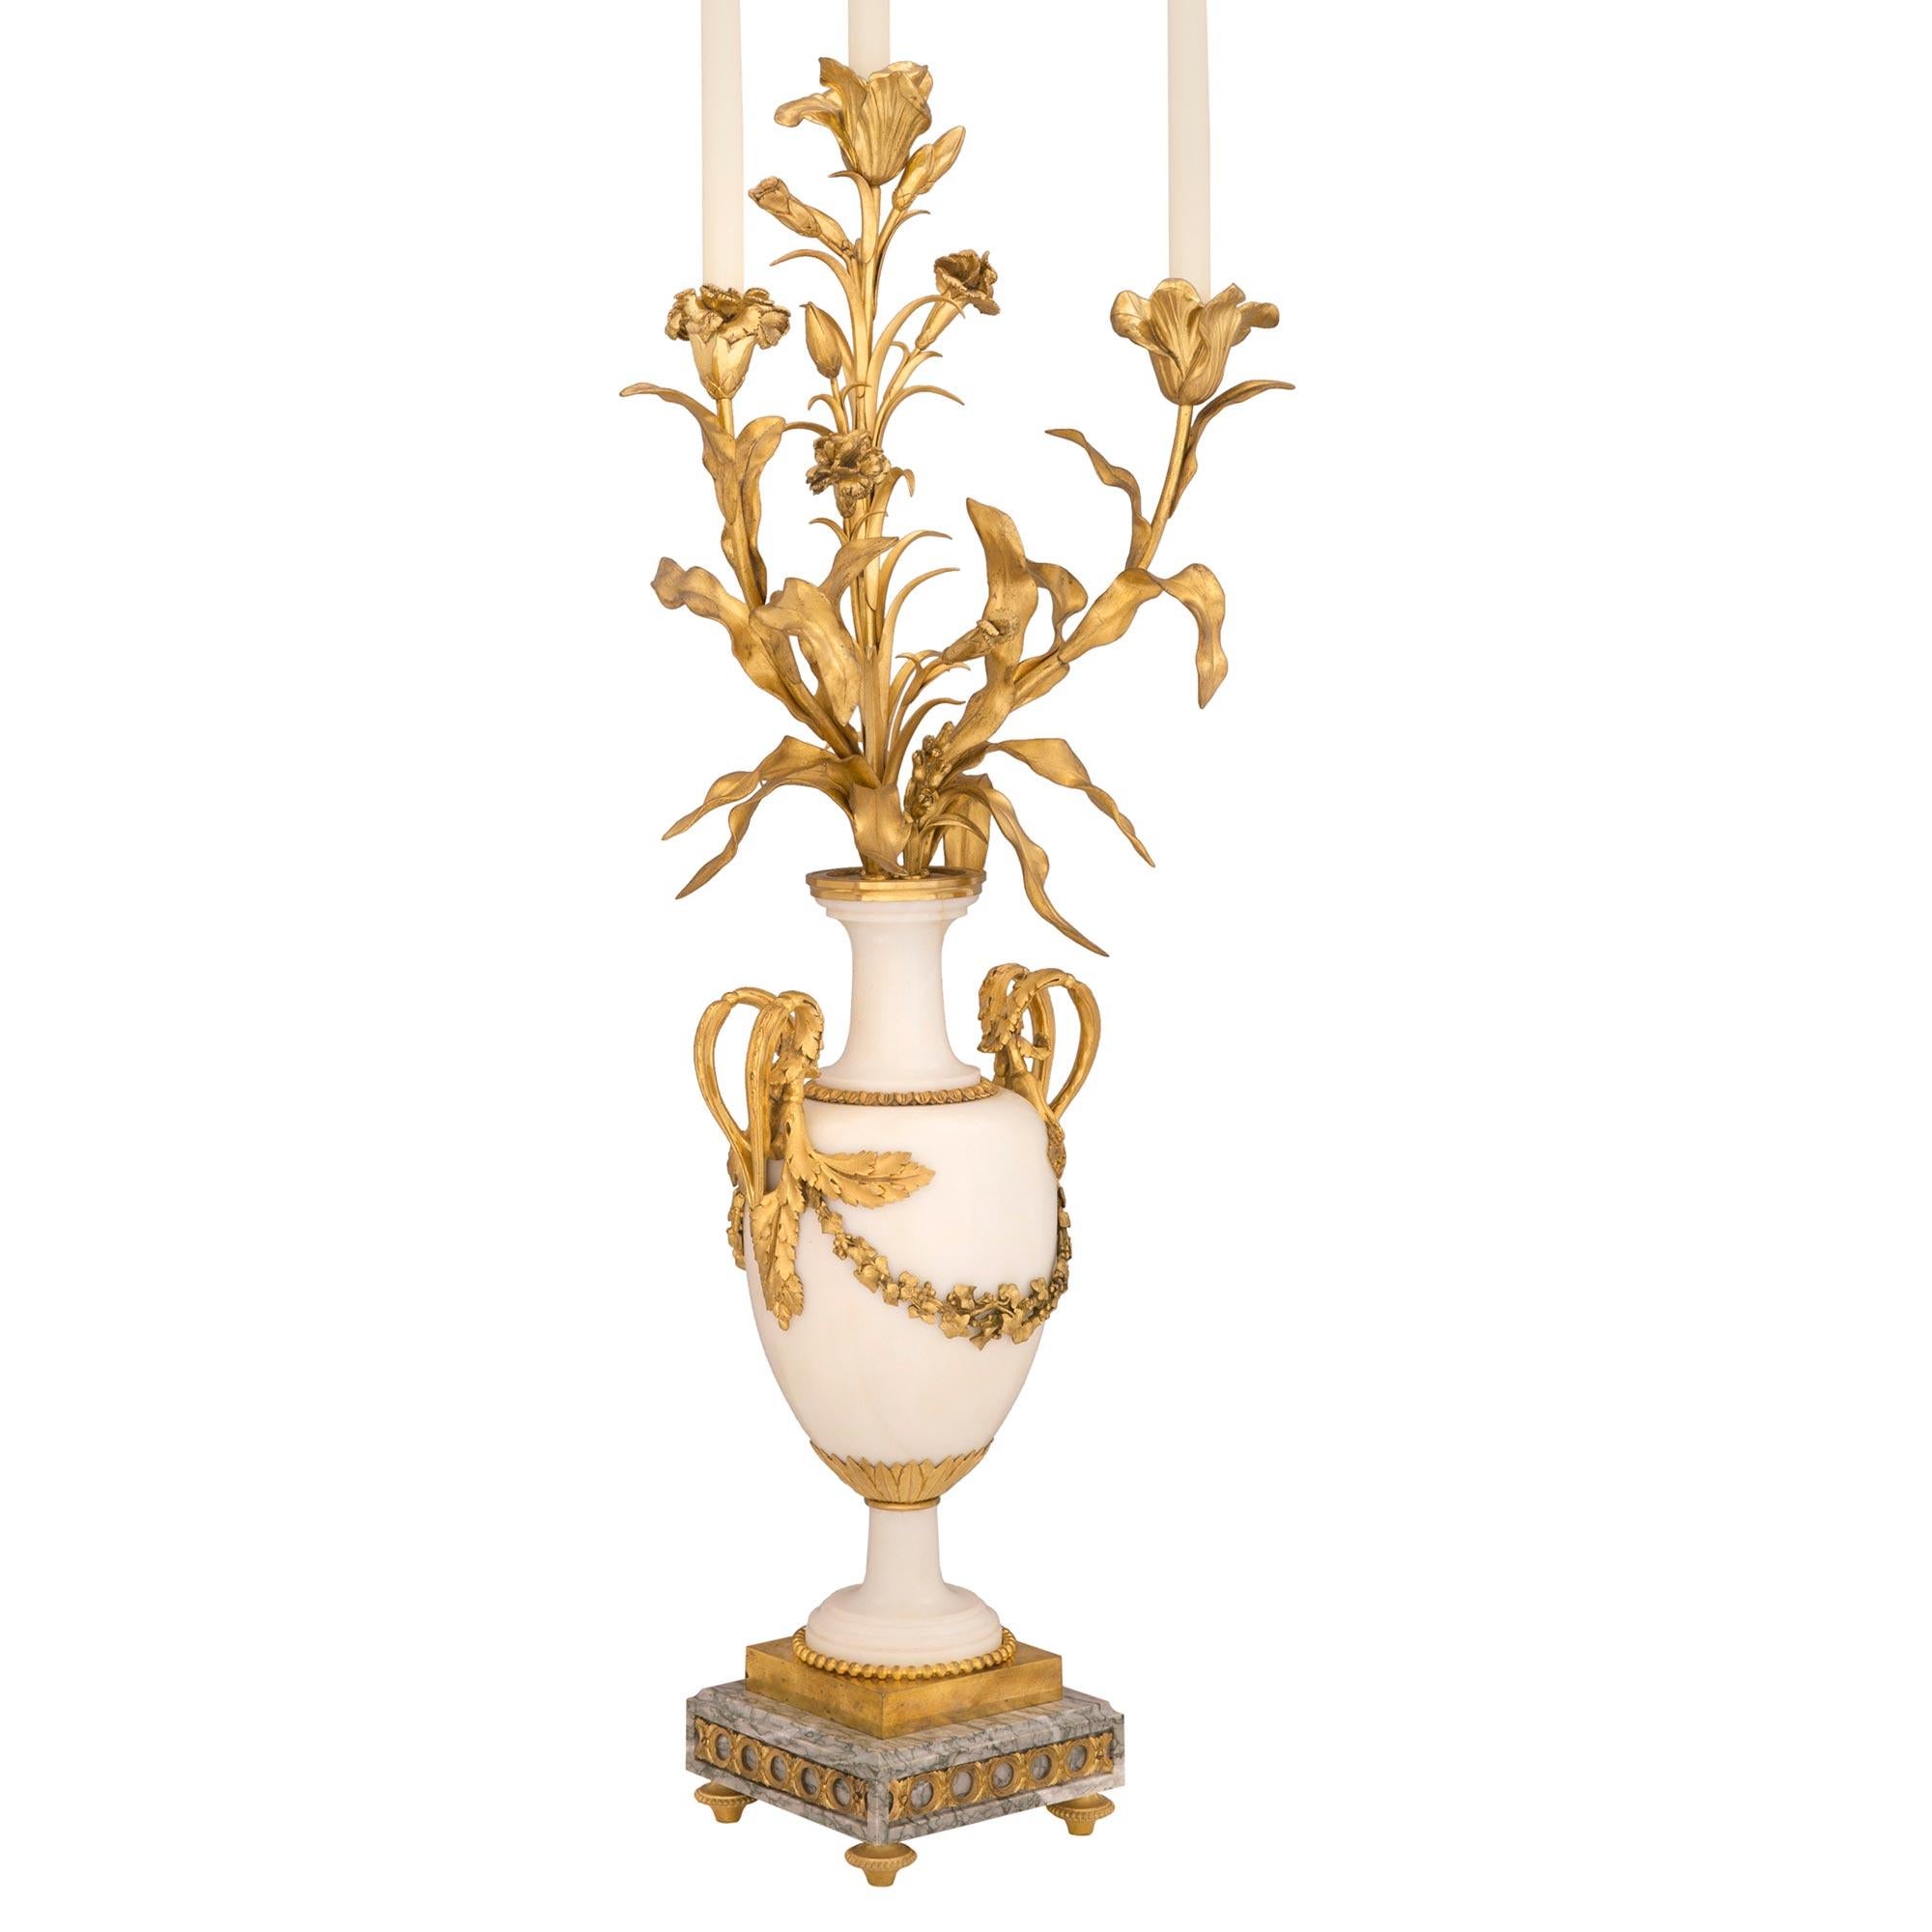 An impressive and high quality pair of French 19th century Louis XVI st. Belle Époque period white Carrara, Vert Campan marble and ormolu candelabras. Each large scale three arm candelabra is raised by four fine ormolu topie shaped feet below the